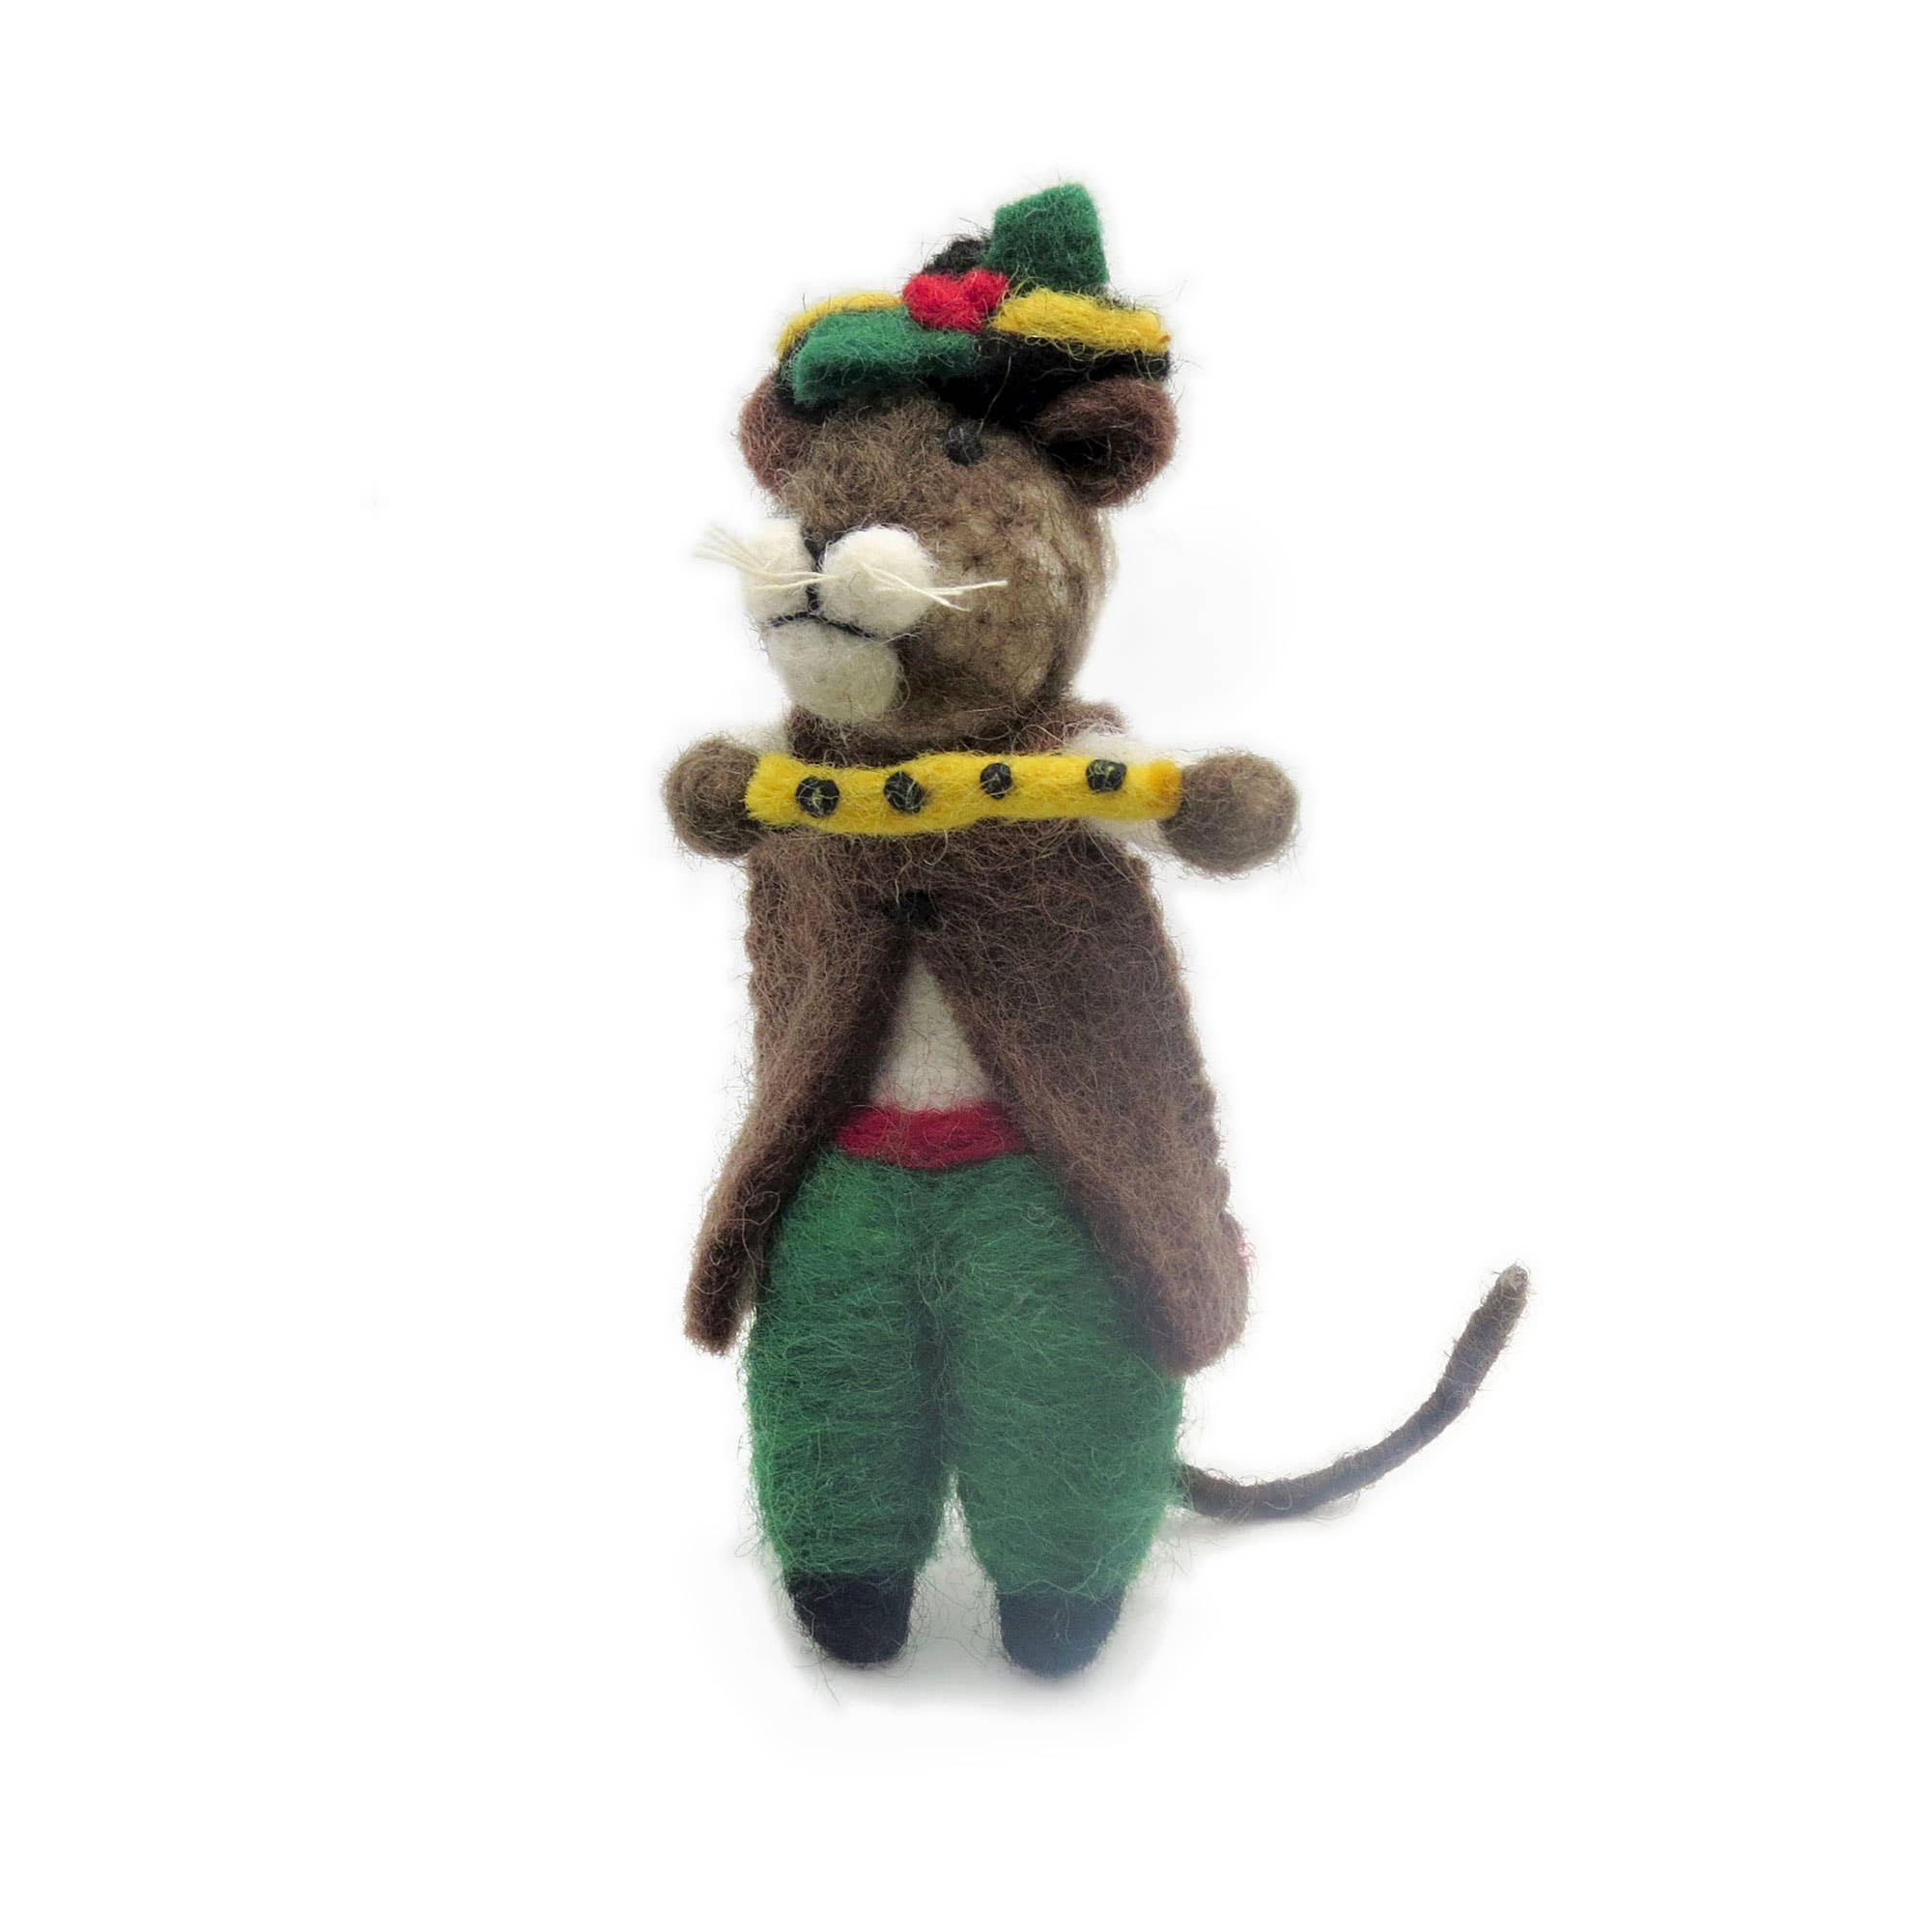 12 Days of Christmas - Piper Mouse a Piping